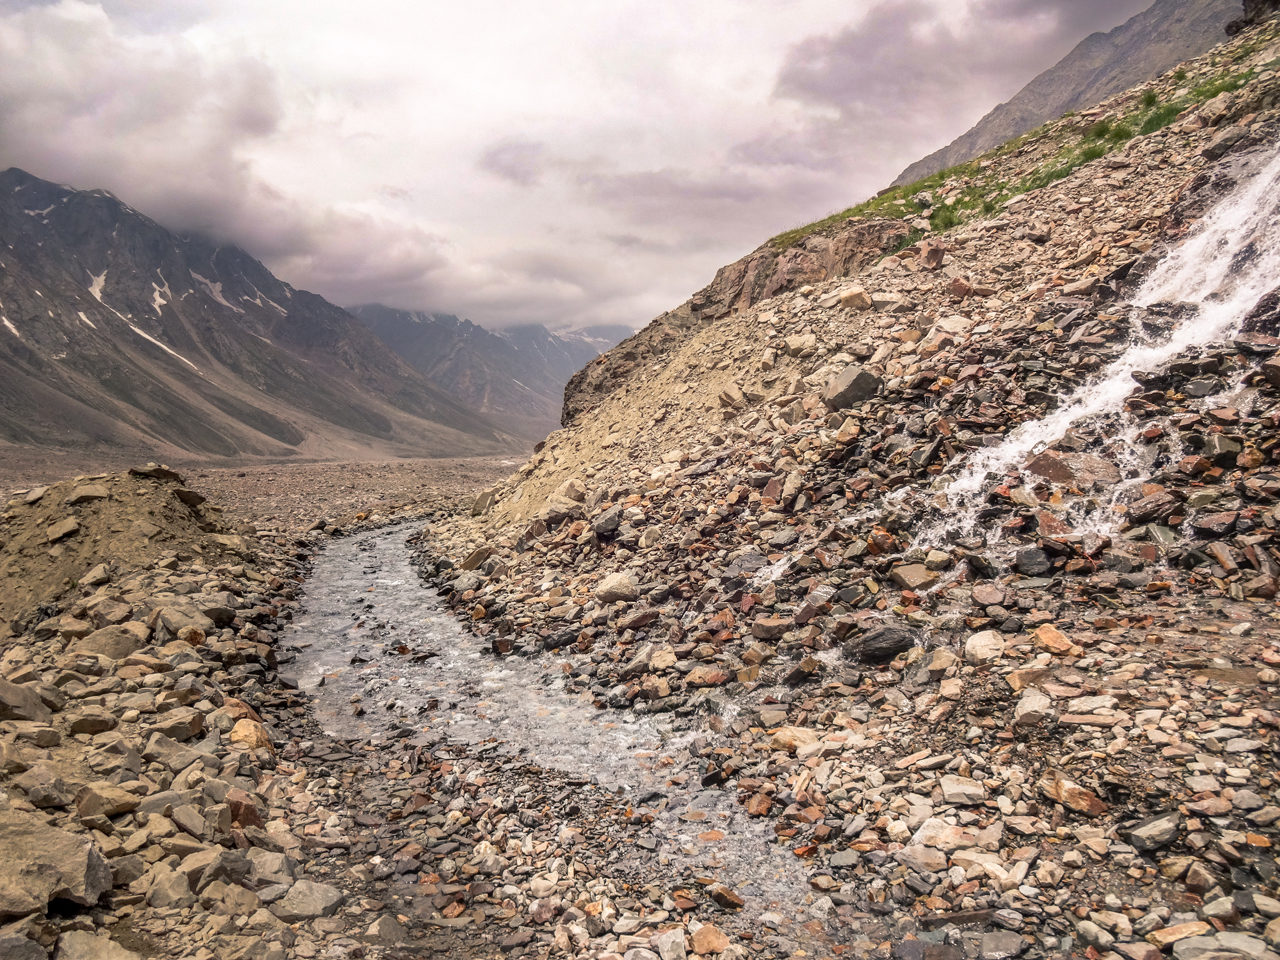 Bad road conditions in Spiti Valley